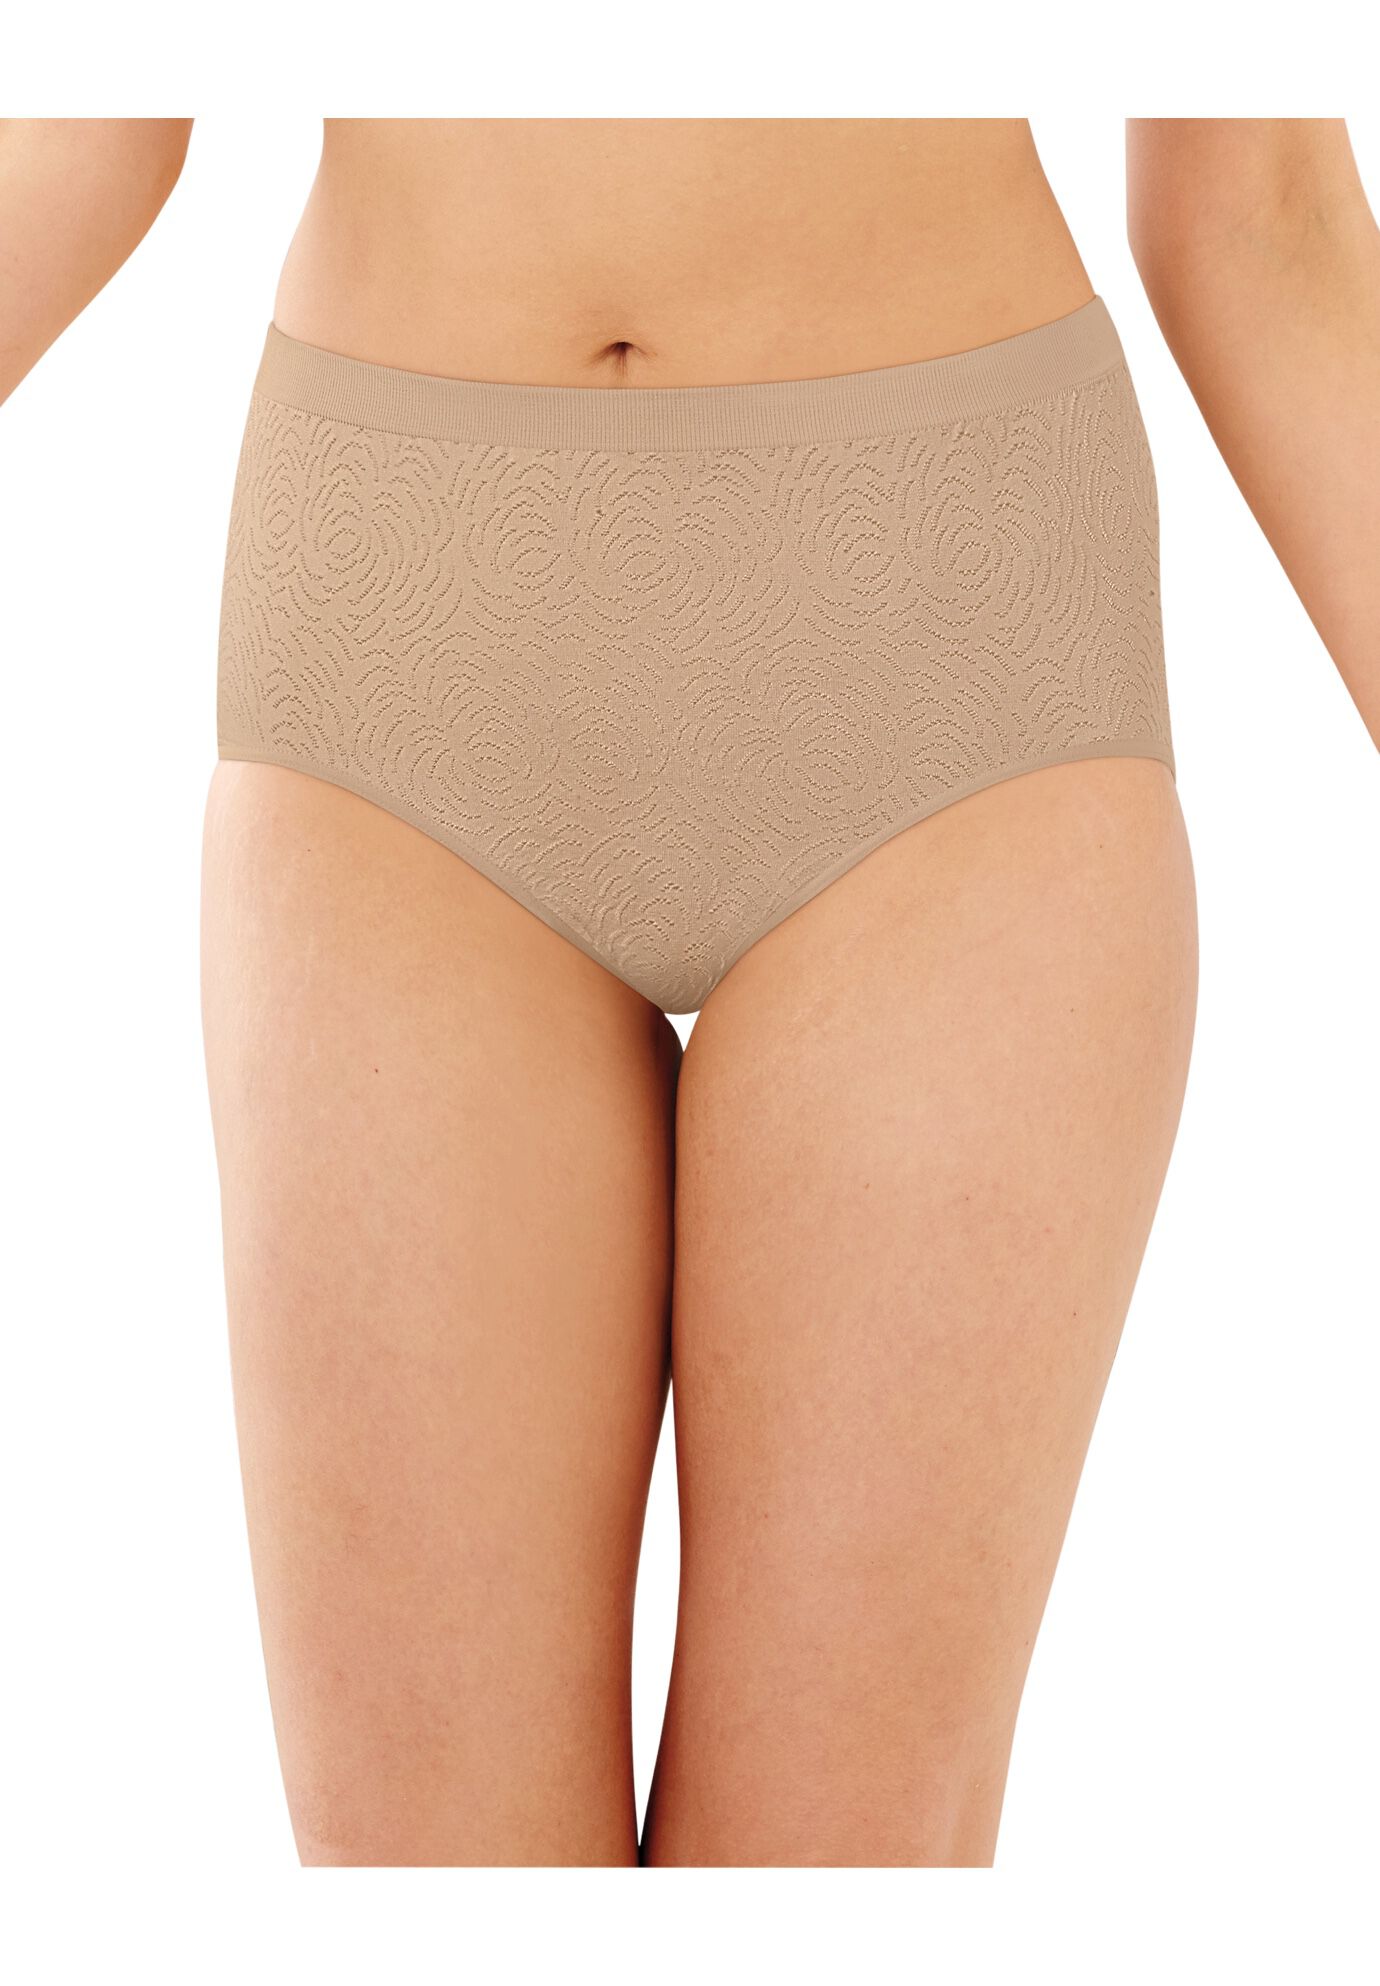 Plus Size Women's Comfort Revolution Brief by Bali in Nude Damask (Size 7)